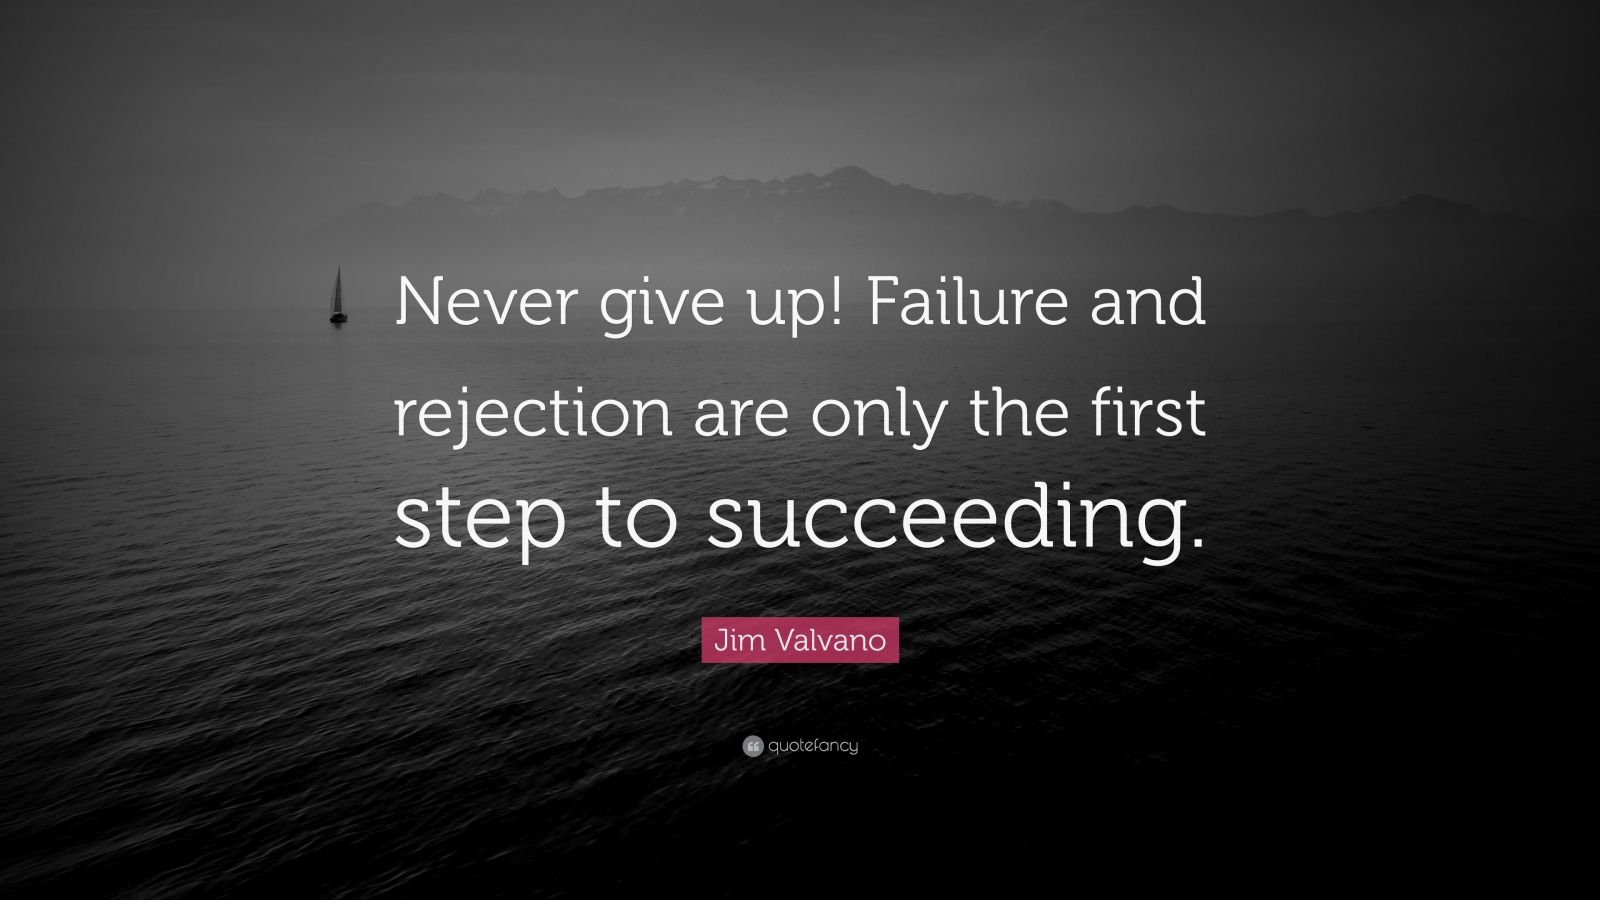 Jim Valvano Quote: “Never give up! Failure and rejection are only the